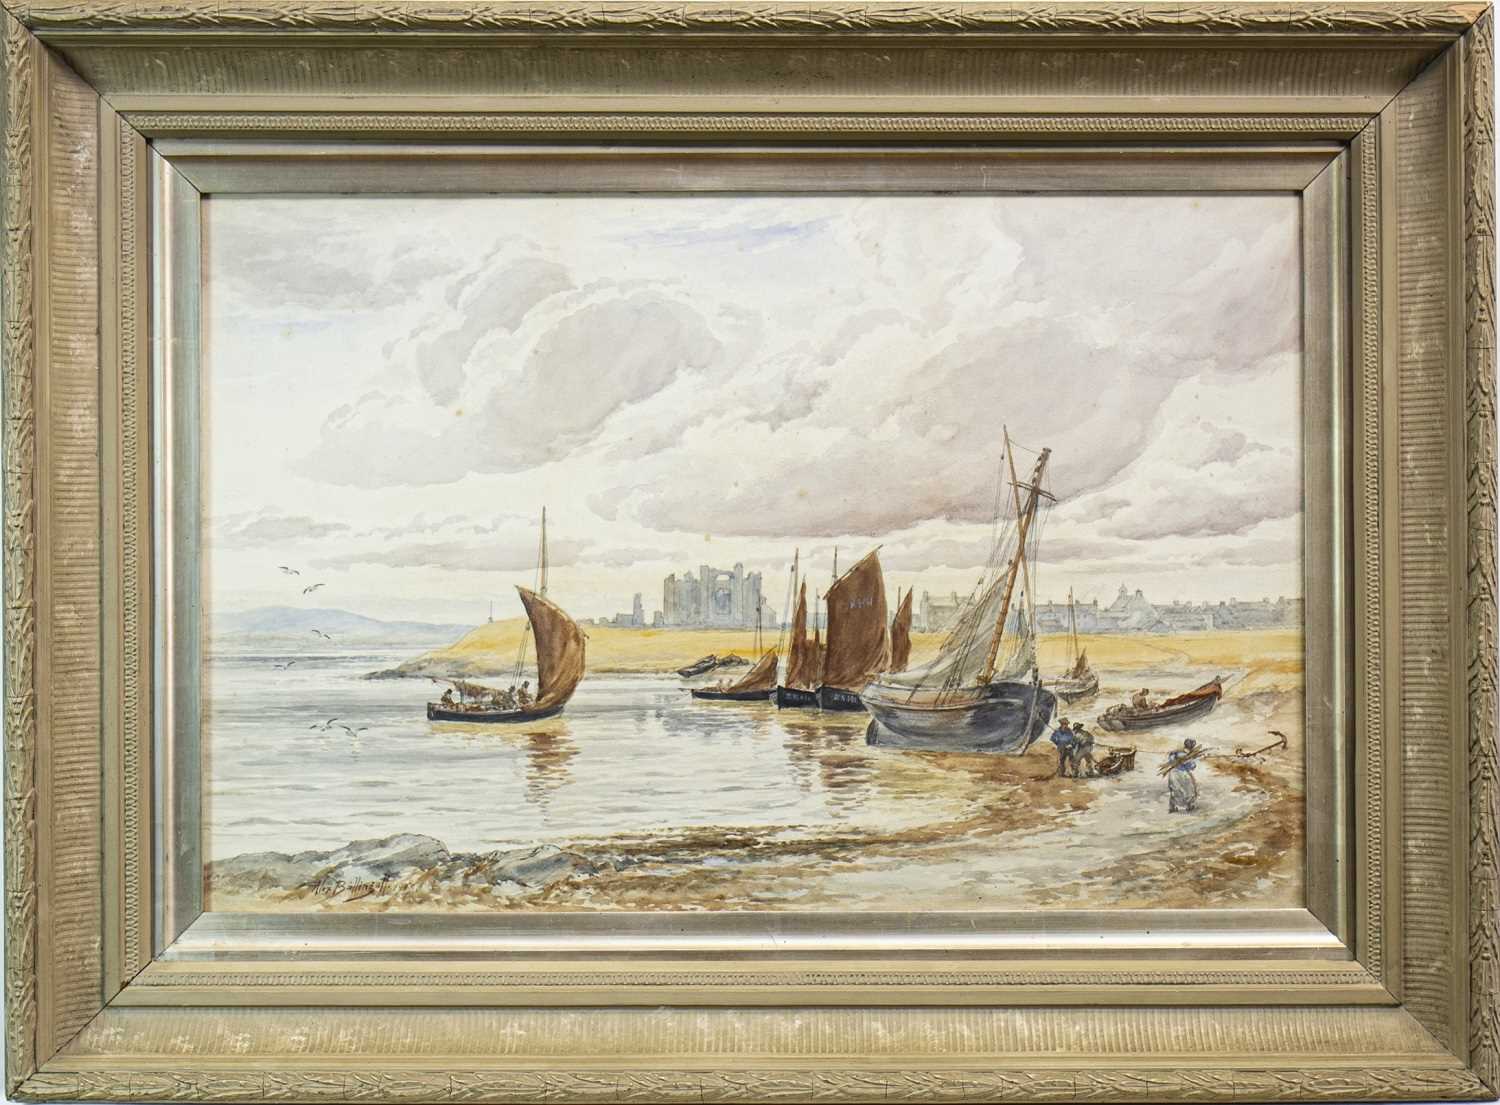 Lot 438 - DIVIDING THE CATCH, A WATERCOLOUR BY ALEXANDER BALLINGALL